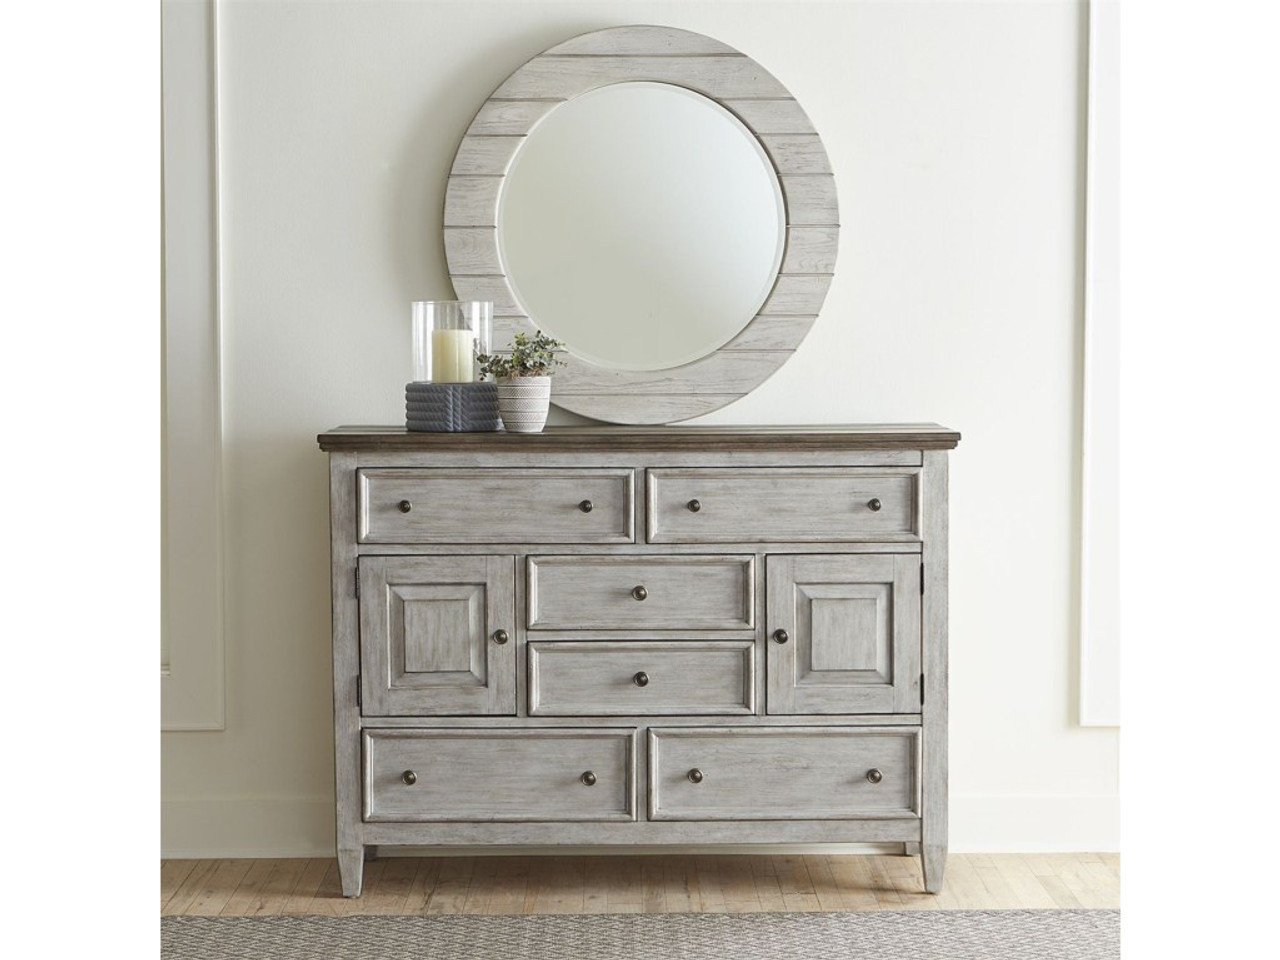 The Dresser With Round Mirror Available At Orange Park Furniture